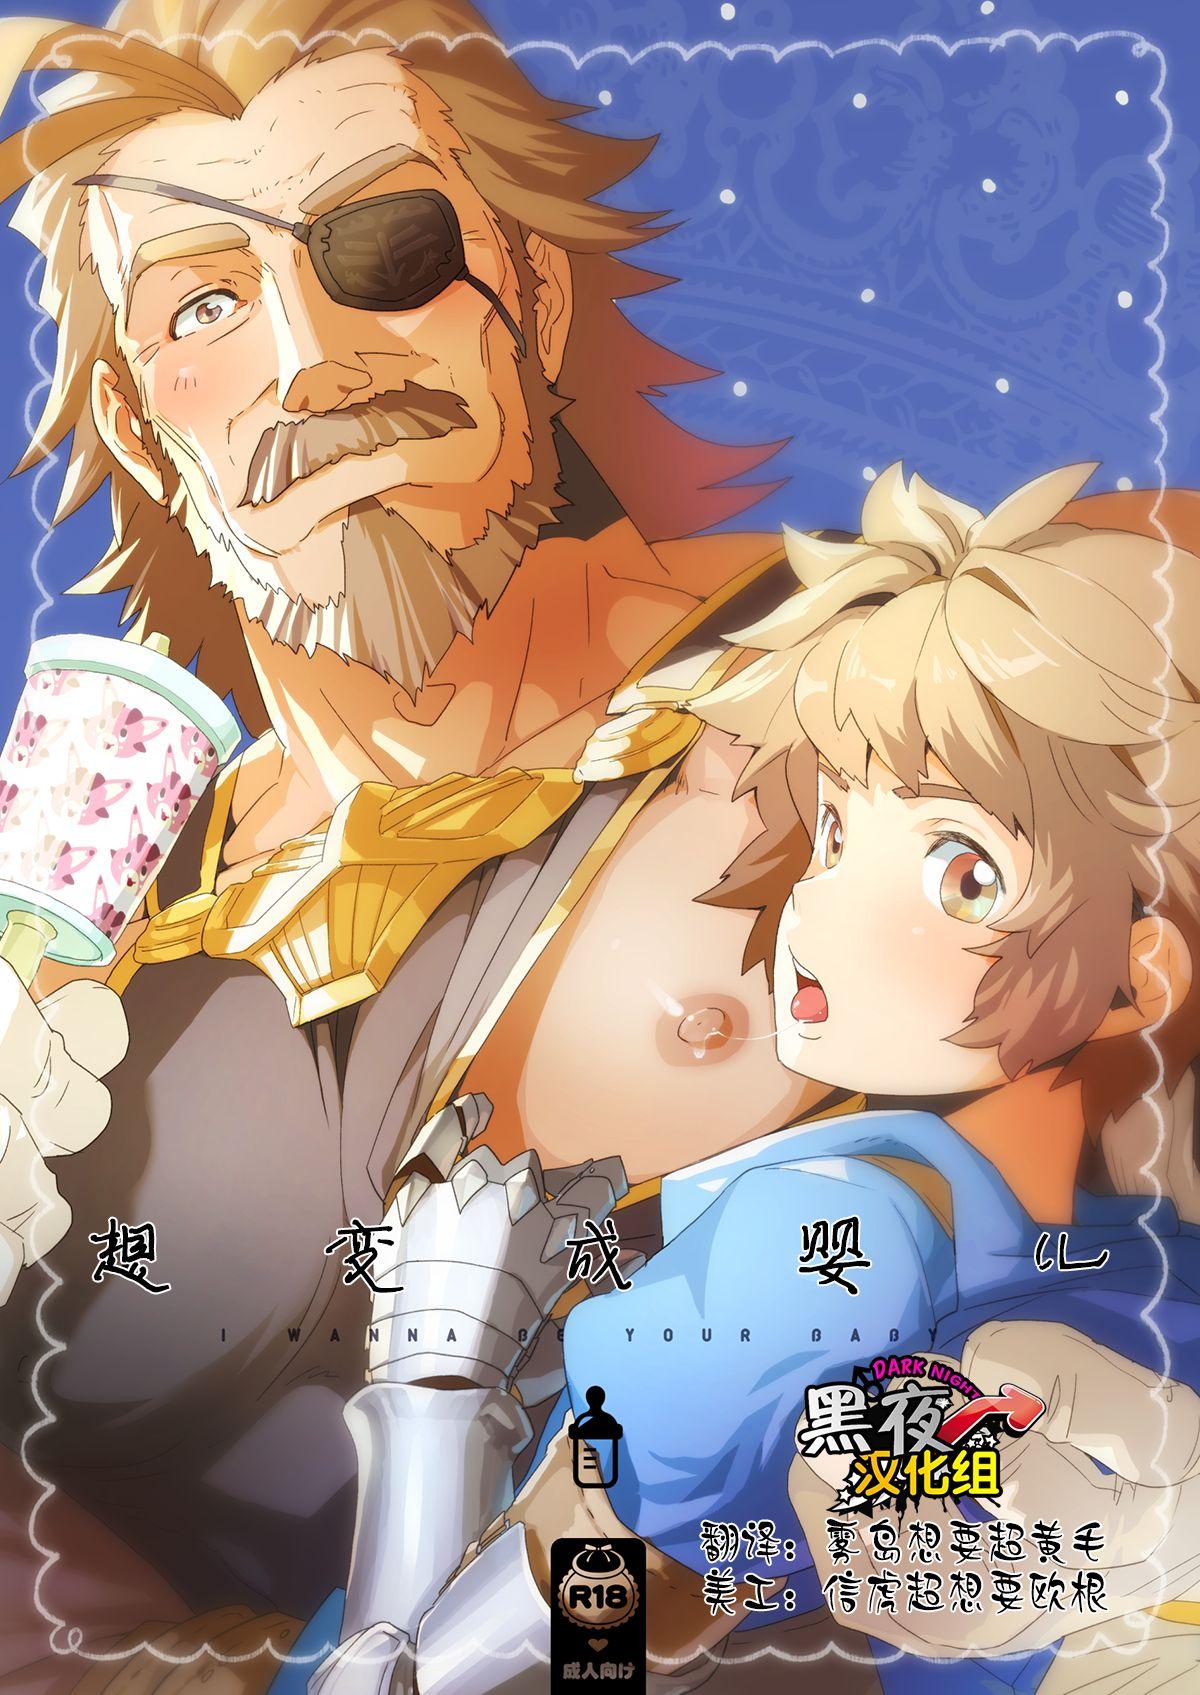 Cum Wanna be baby | 想变成婴儿 - Granblue fantasy Hairy - Picture 1